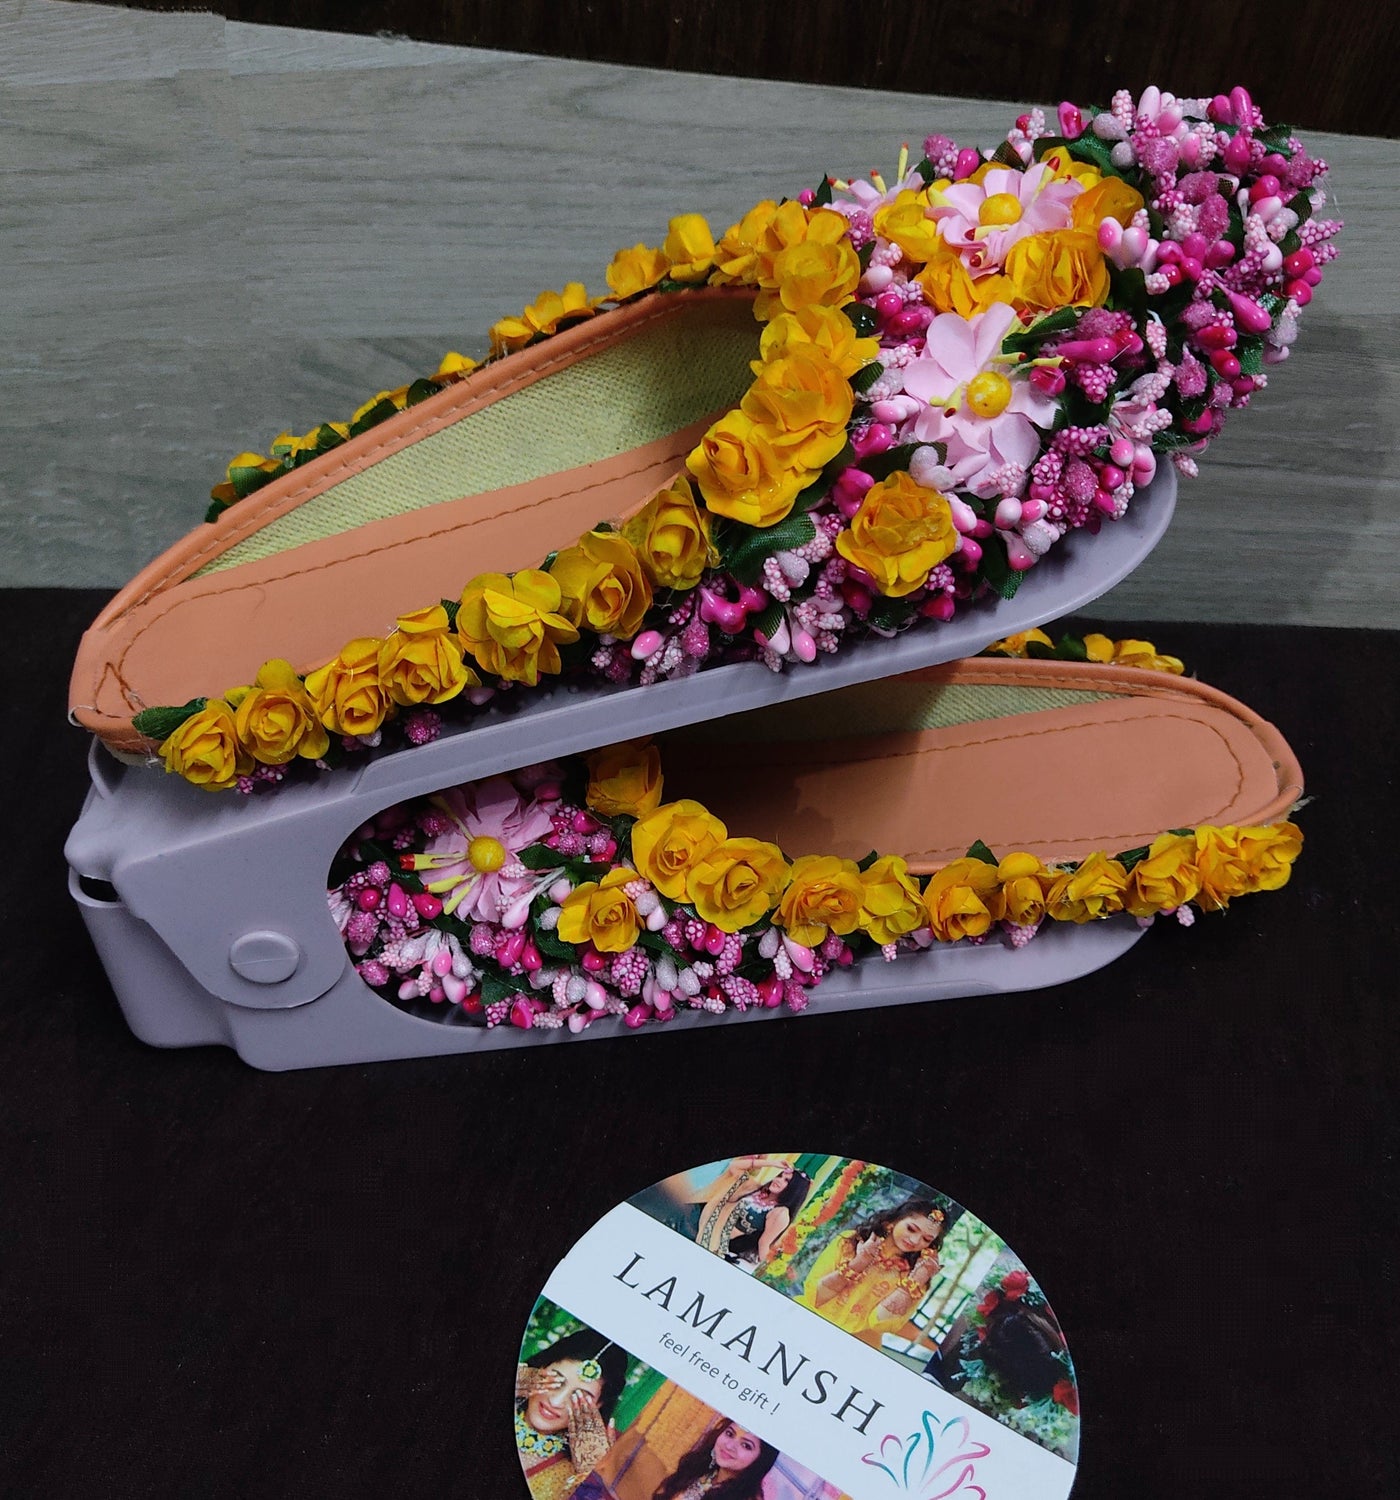 LAMANSH floral set with slippers Yellow Pink LAMANSH® 🌺 Dry Flower Jewellery Set with Floral Footwear / Haldi Floral Jewelry set with slippers